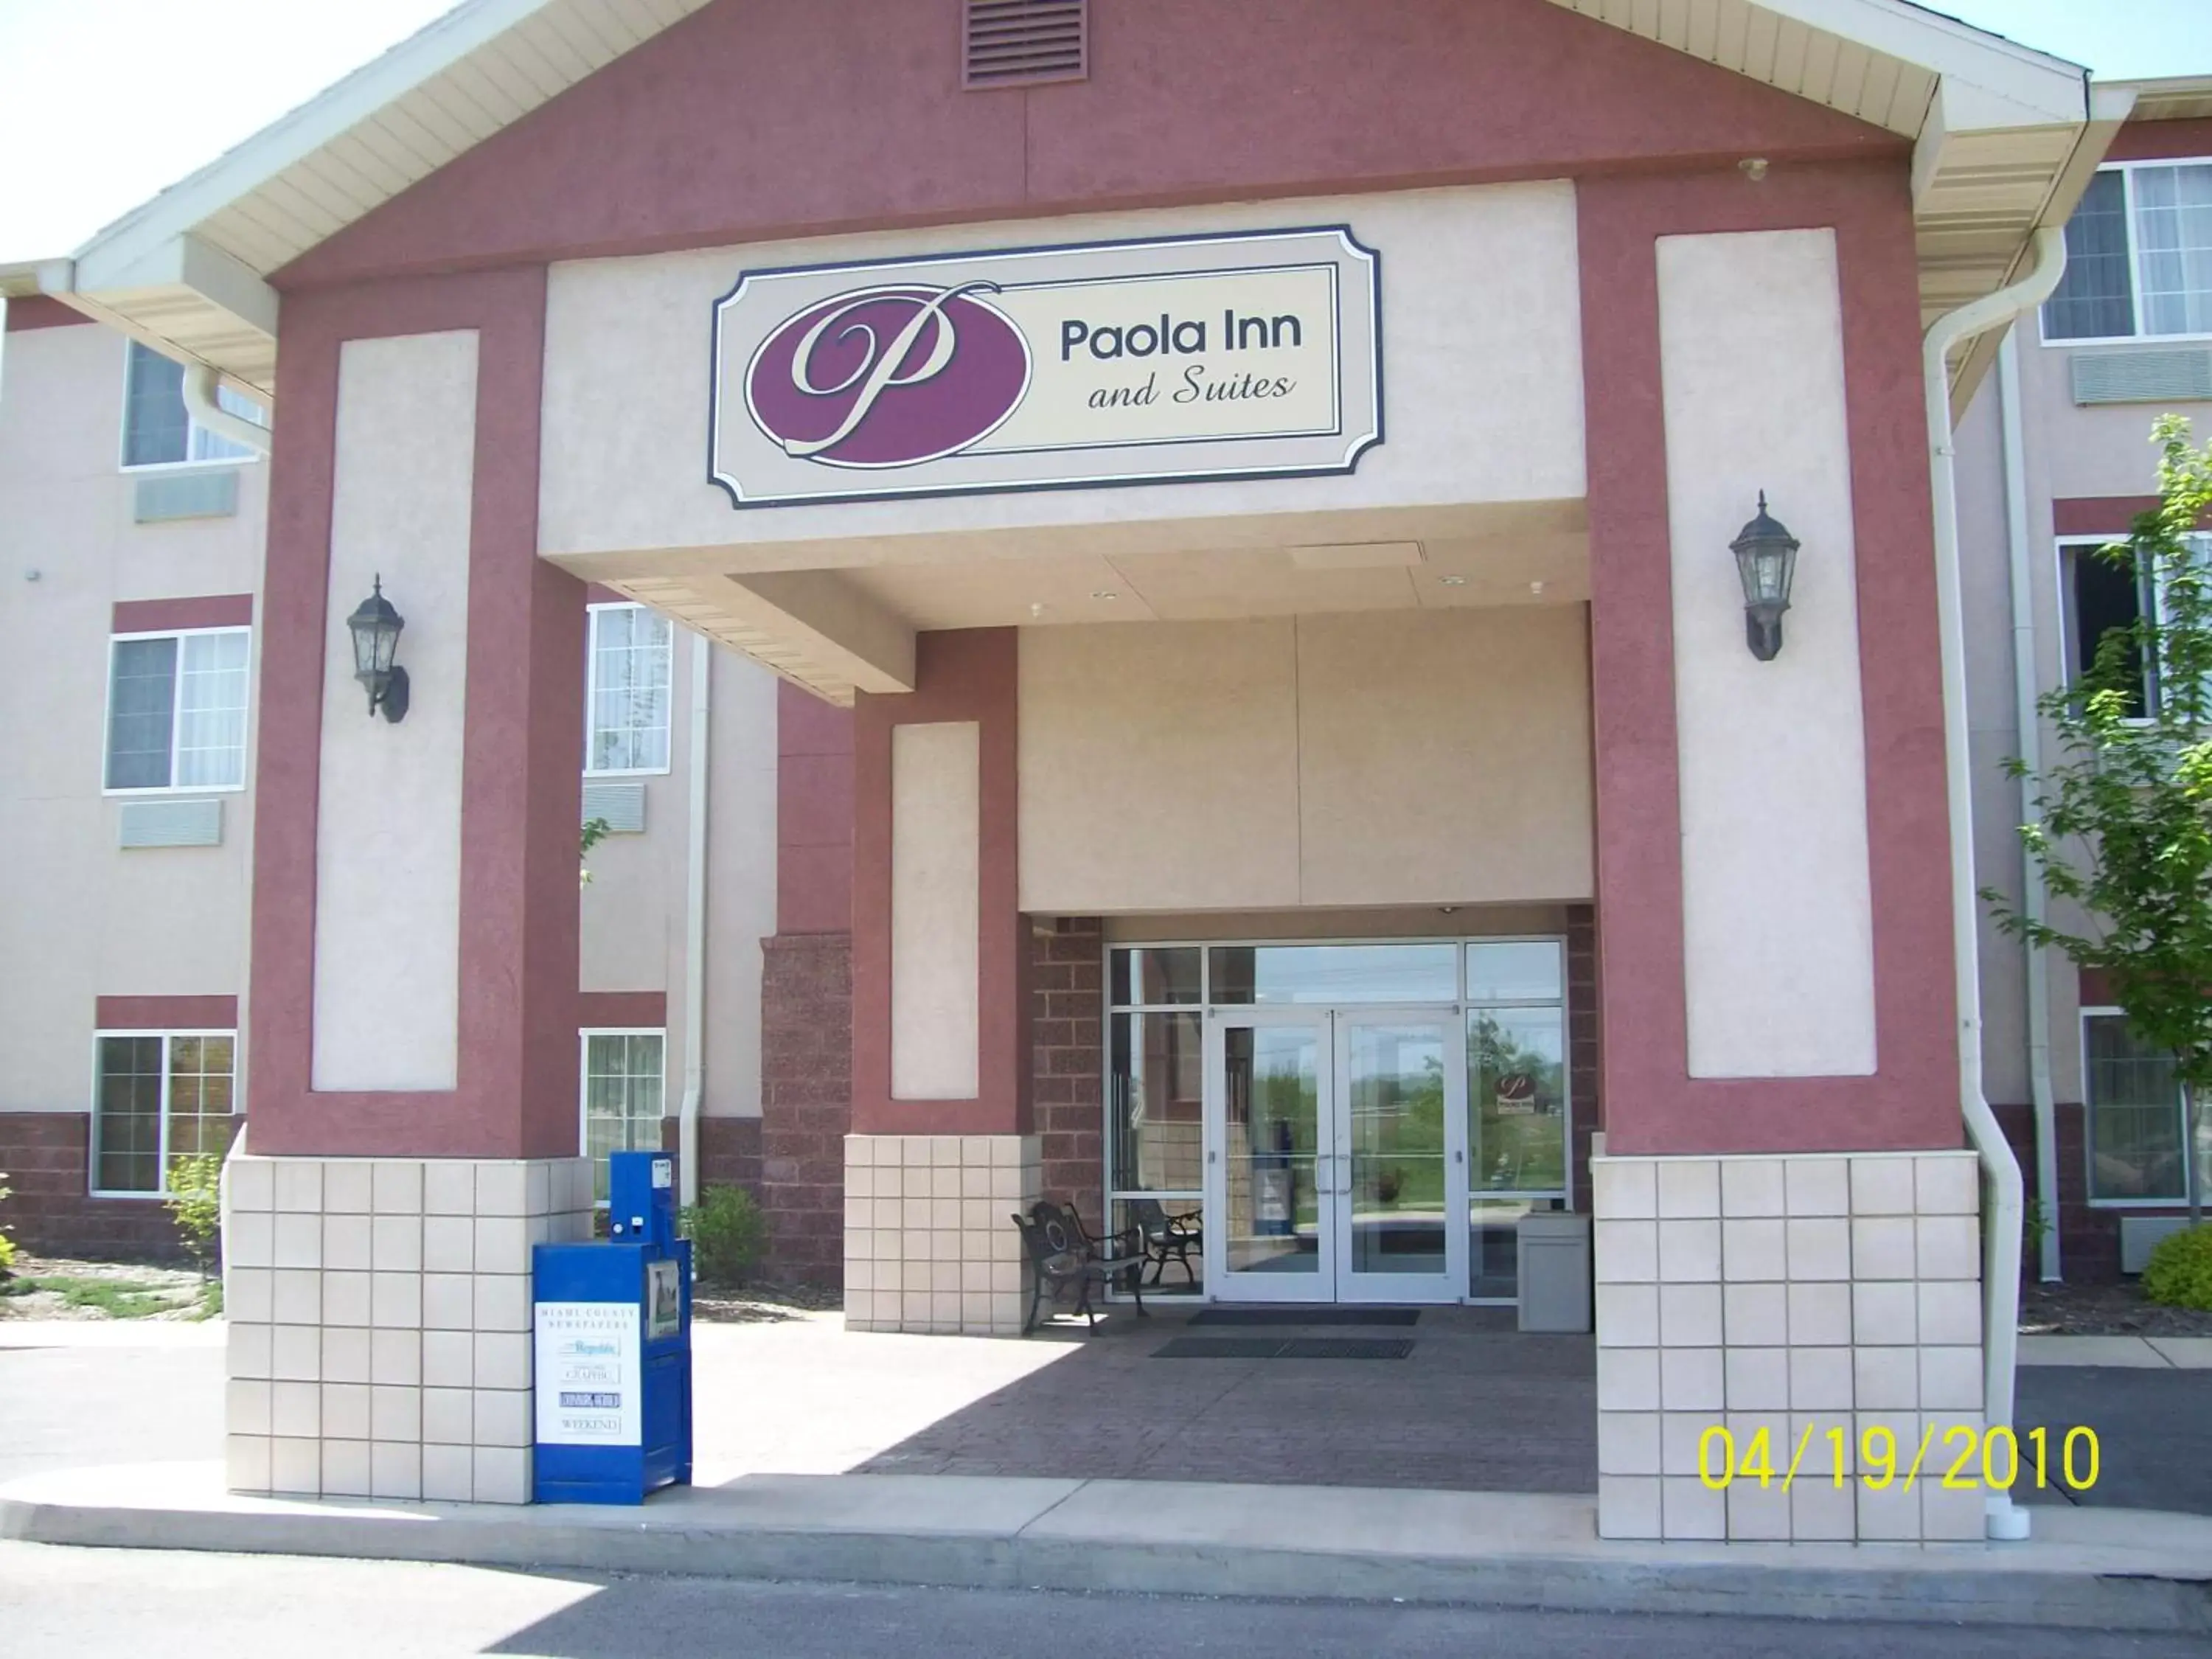 Facade/Entrance in Paola Inn and Suites